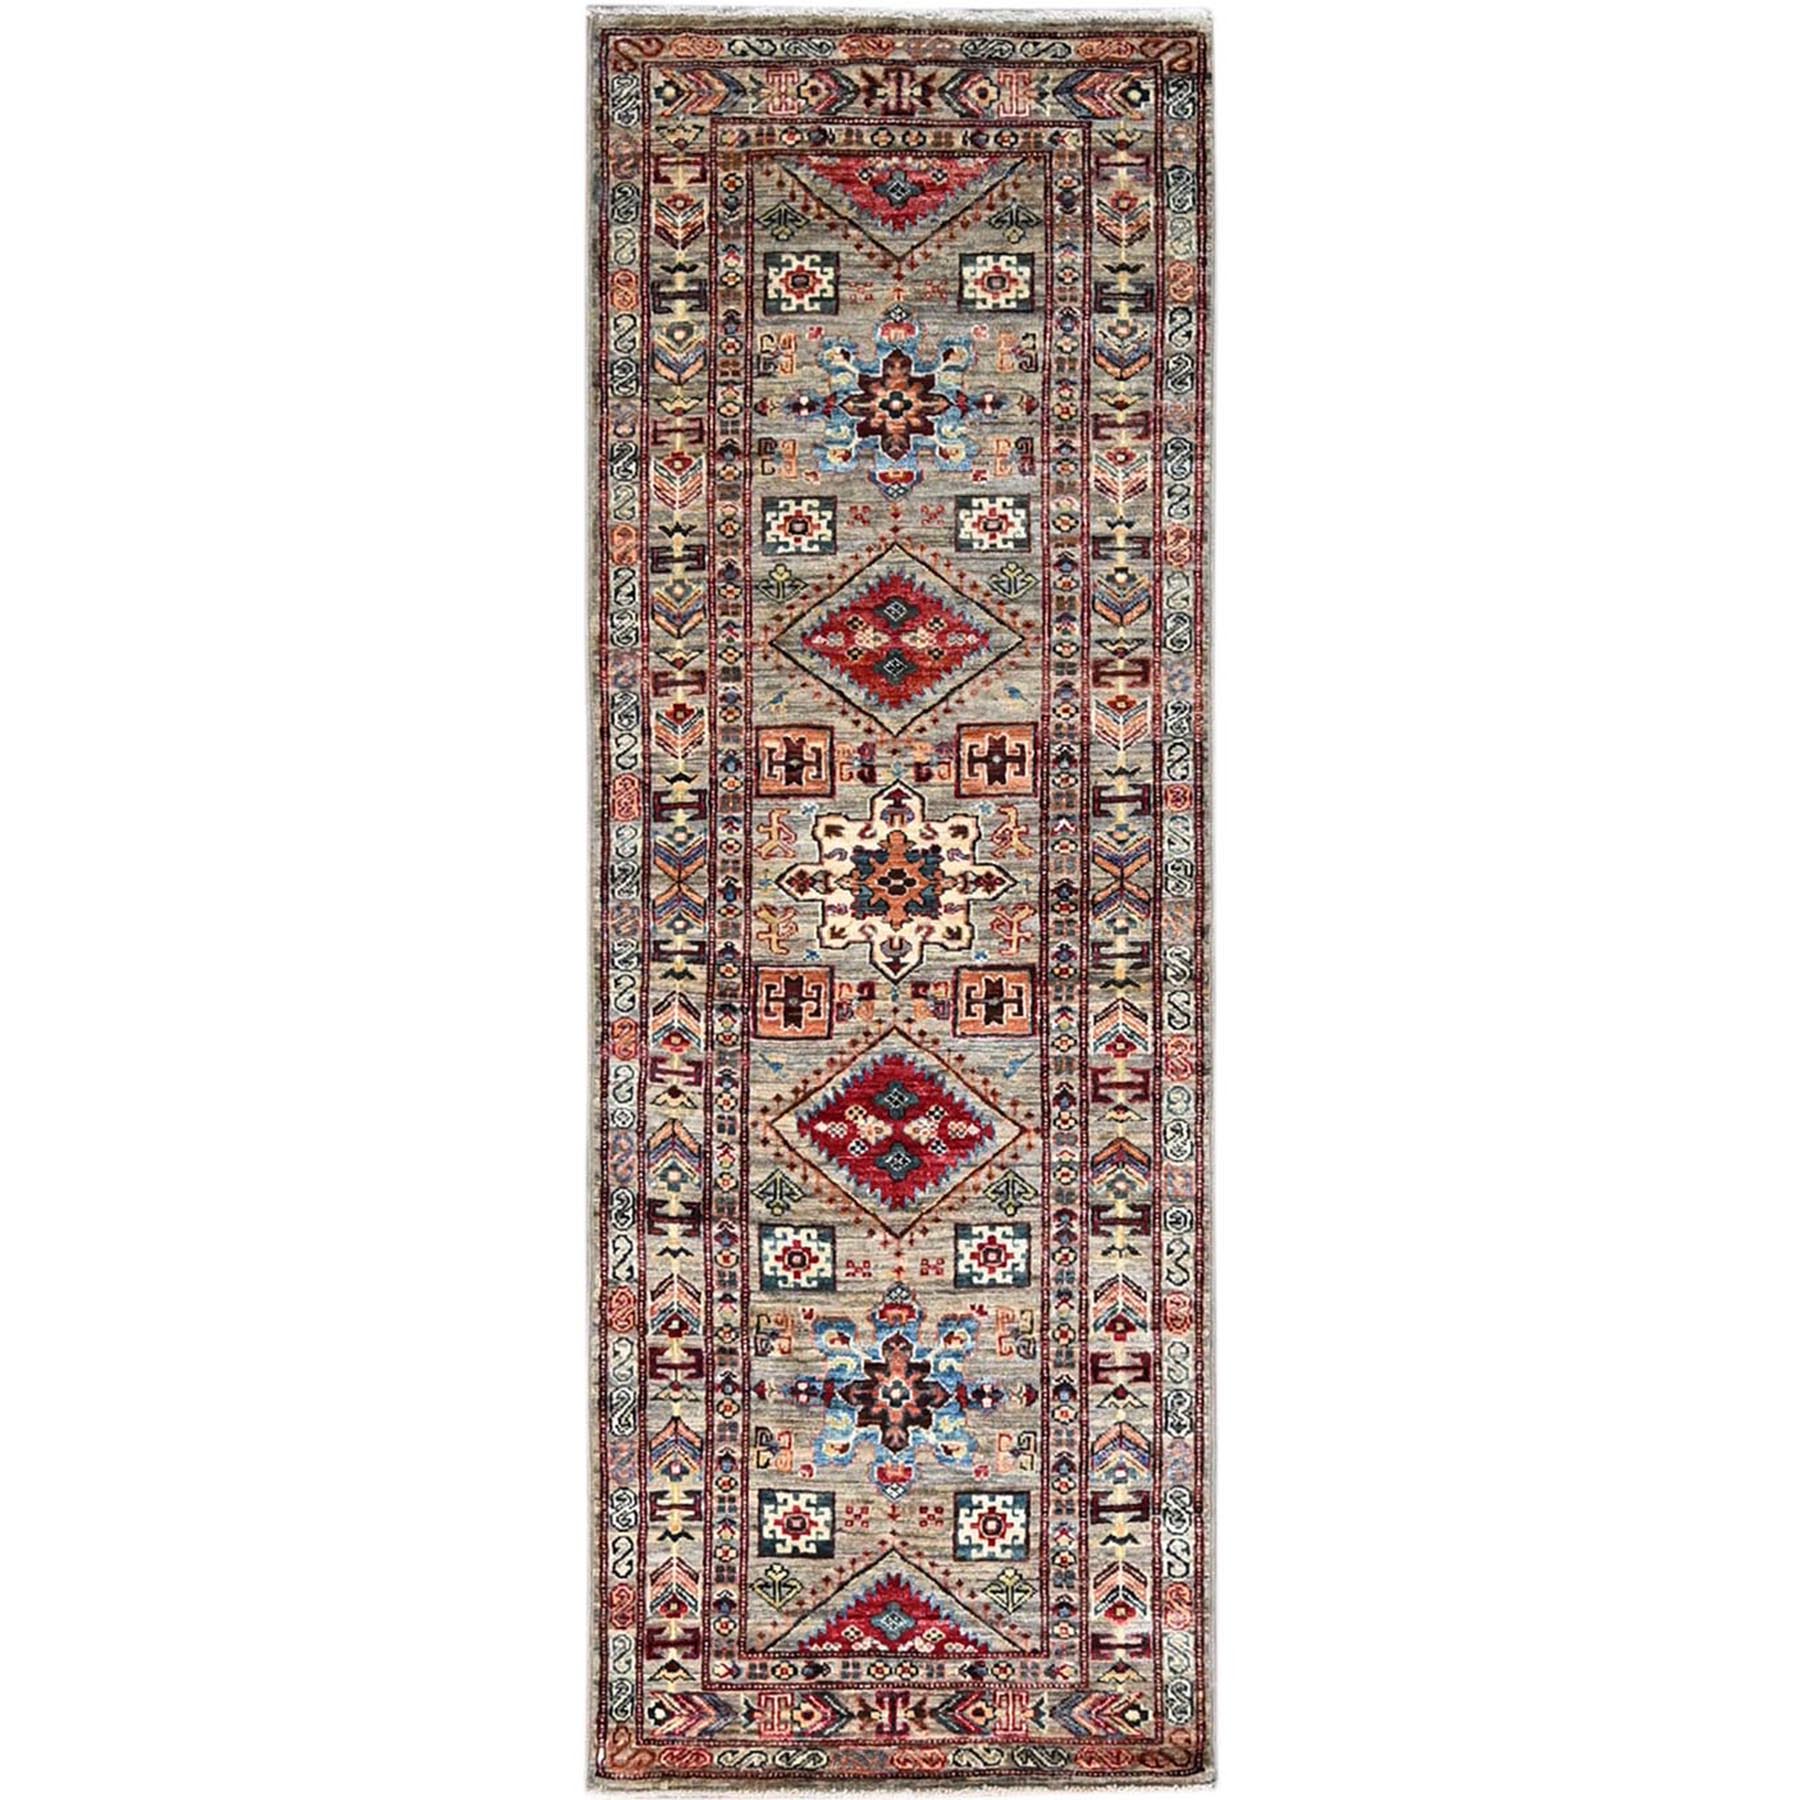 Colonnade Gray, 100% Wool, Vegetable Dyes, Densely Woven Afghan Hand Knotted Super Kazak with Geometric Elements, Runner Oriental Rug